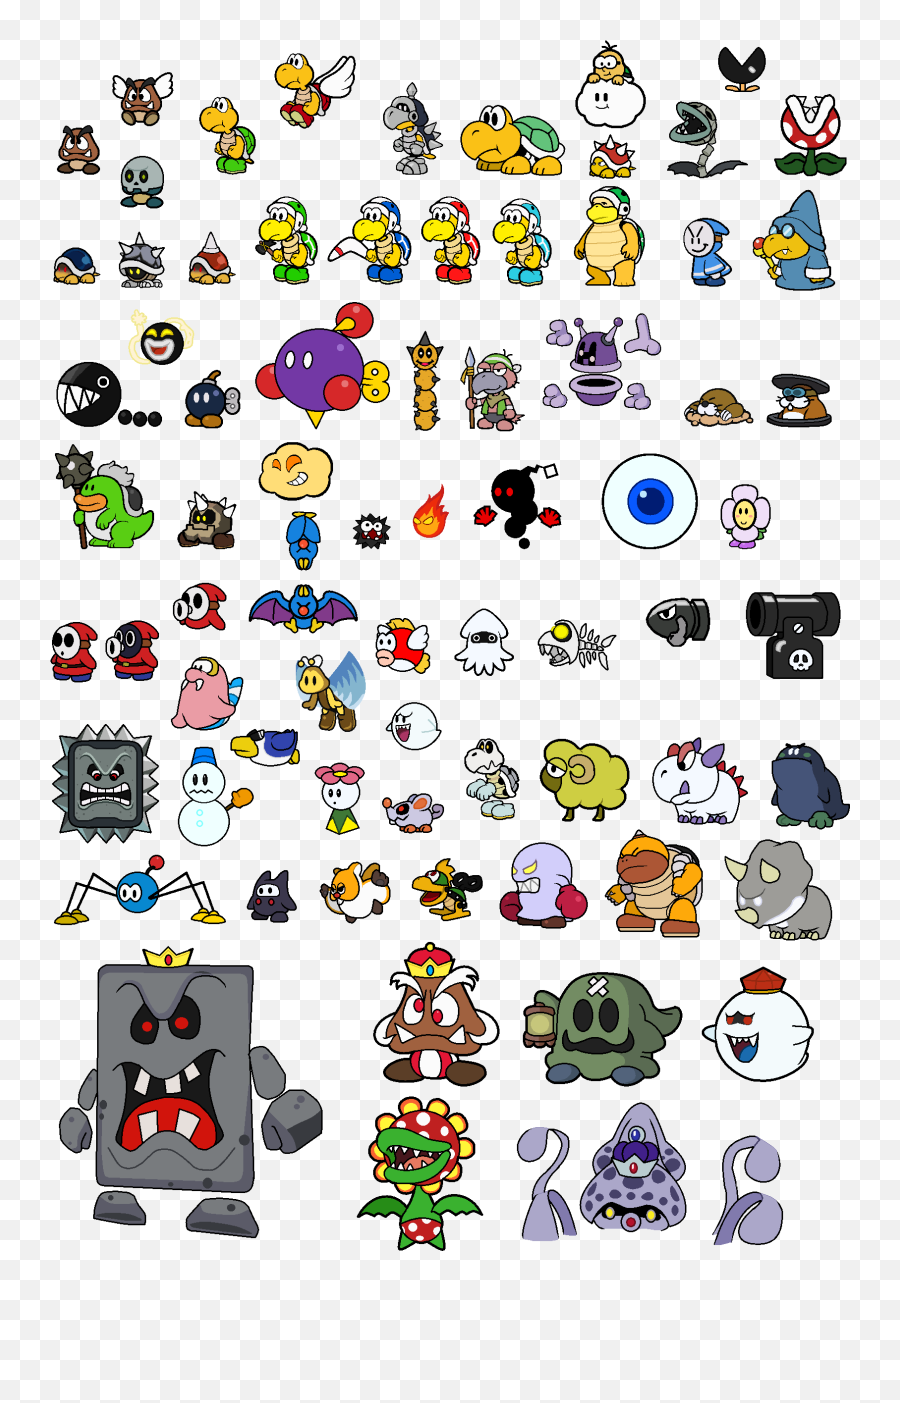 Paper Mario Updated Sprites Redux - Paper Mario All Stars Png,King Boo Png